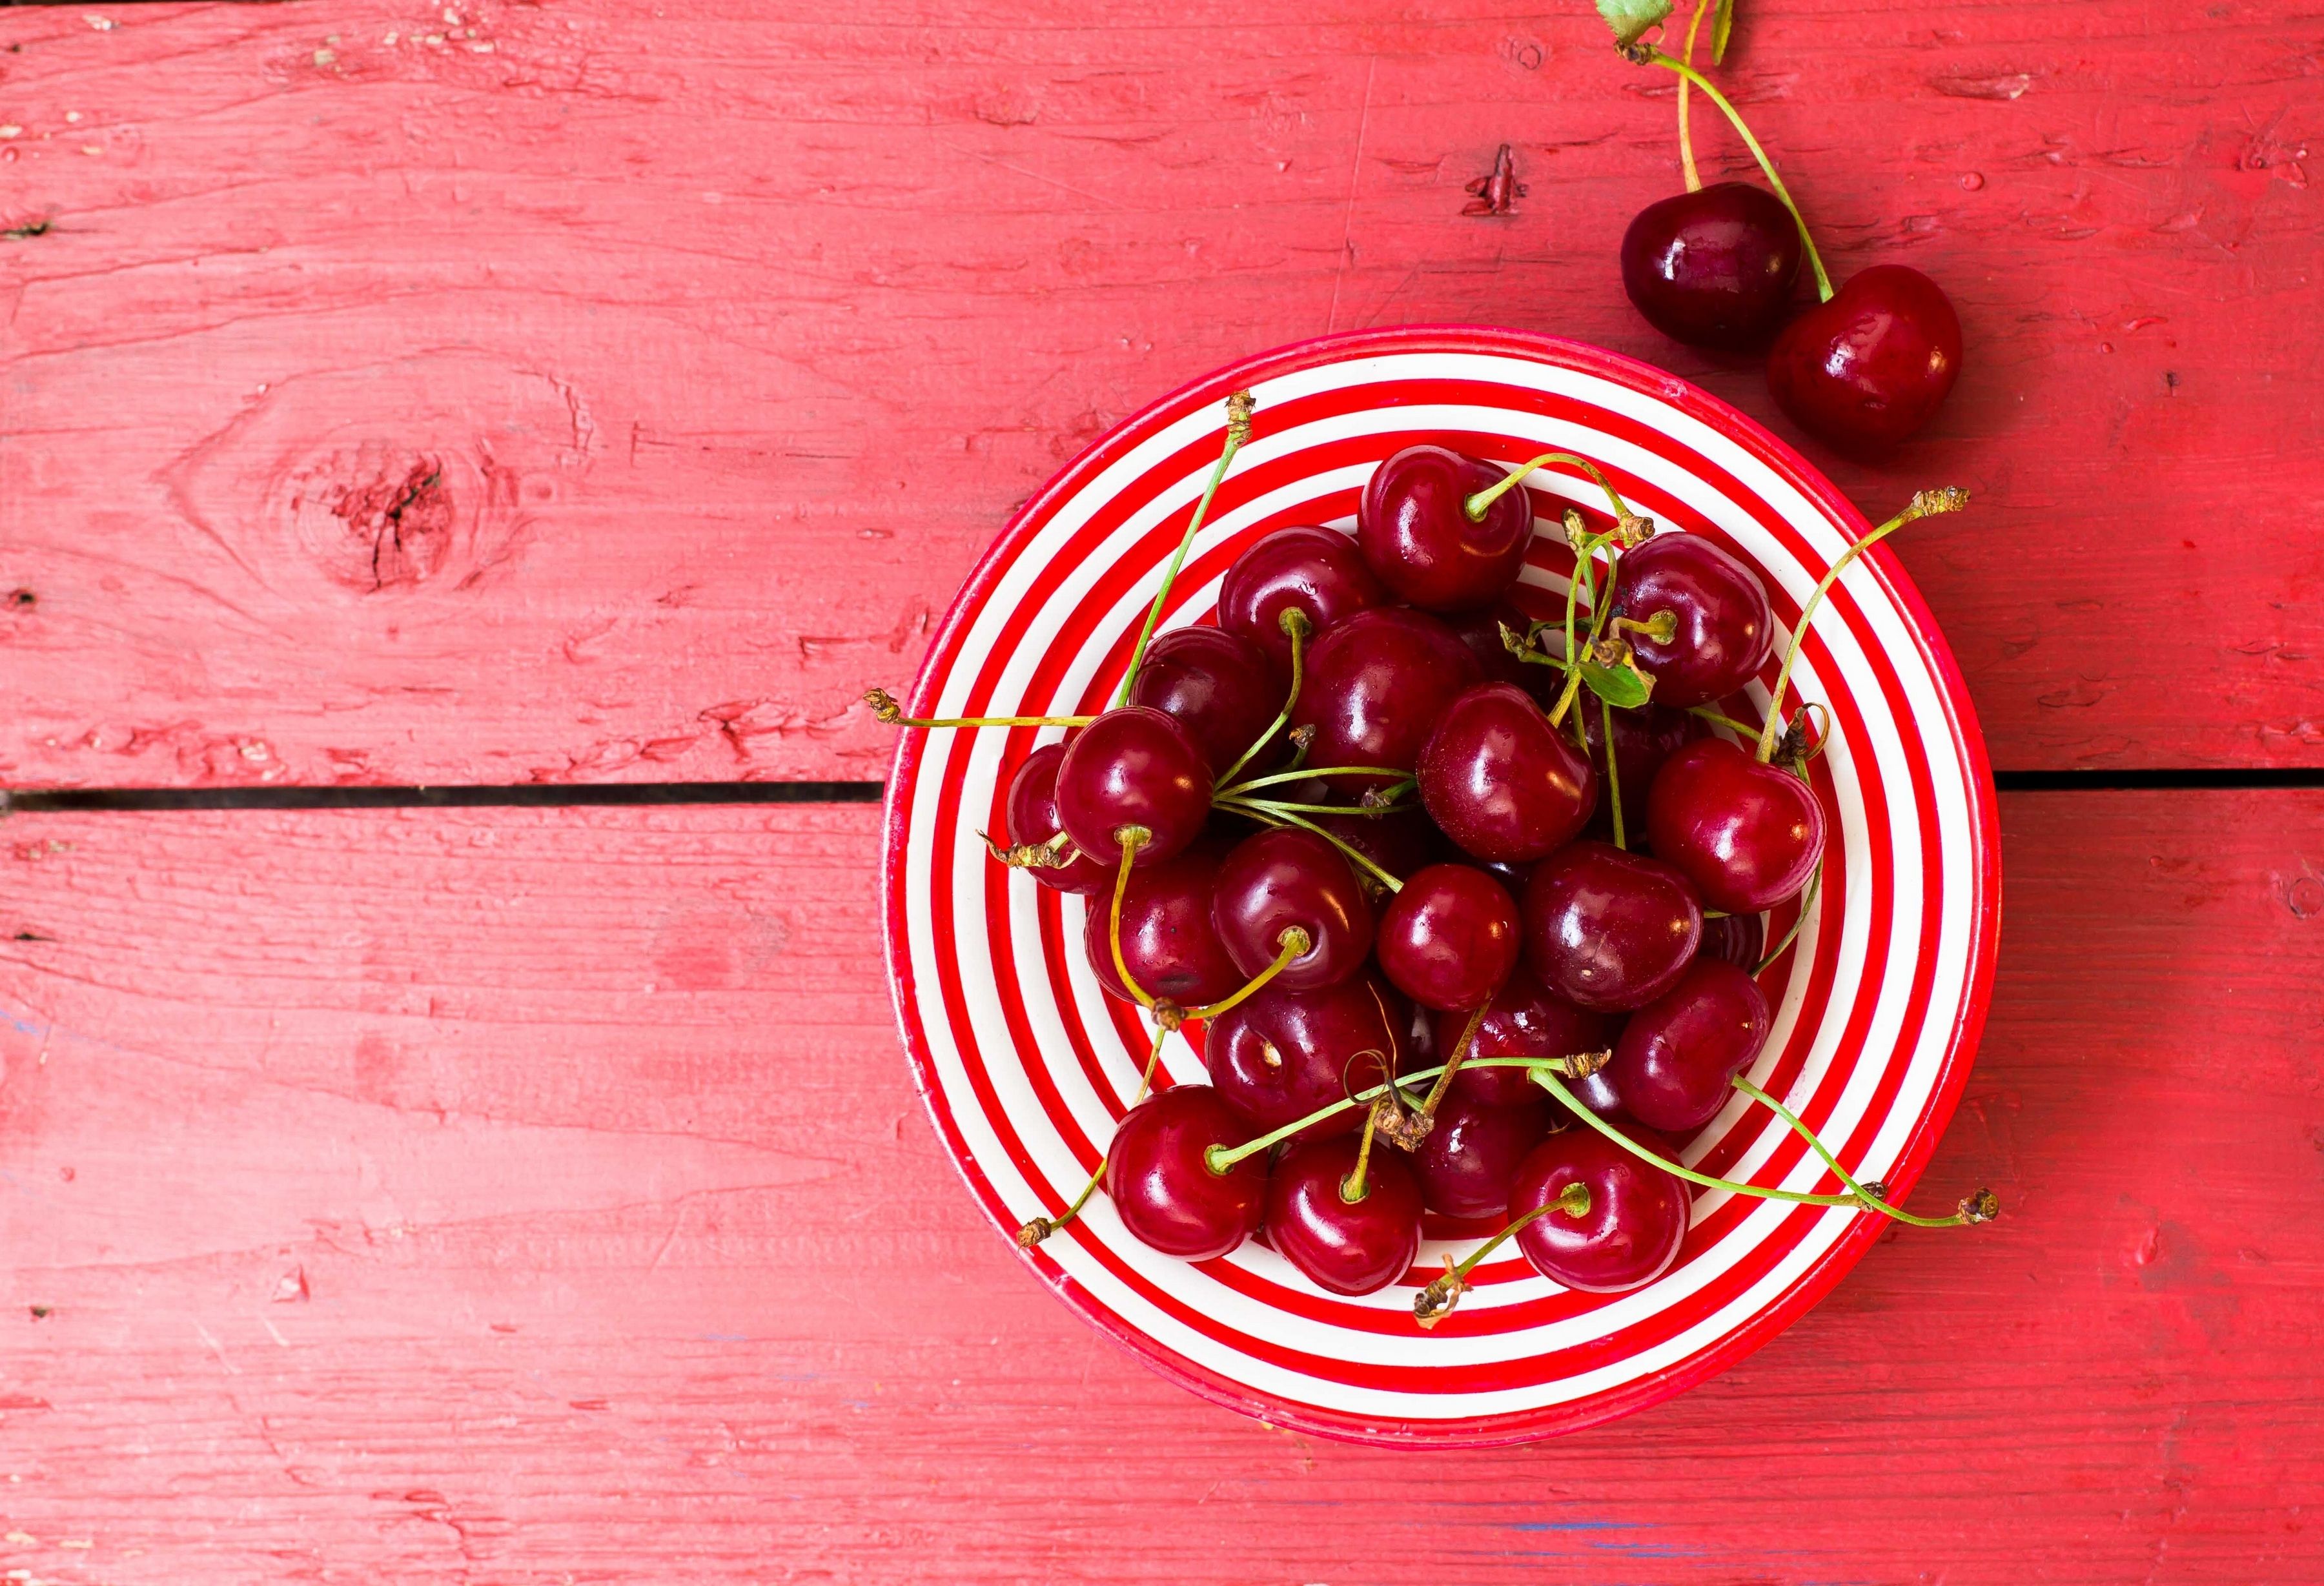 Cherries Wallpaper 4K, Cherry fruits, Bowl of fruits, Wooden background, Food